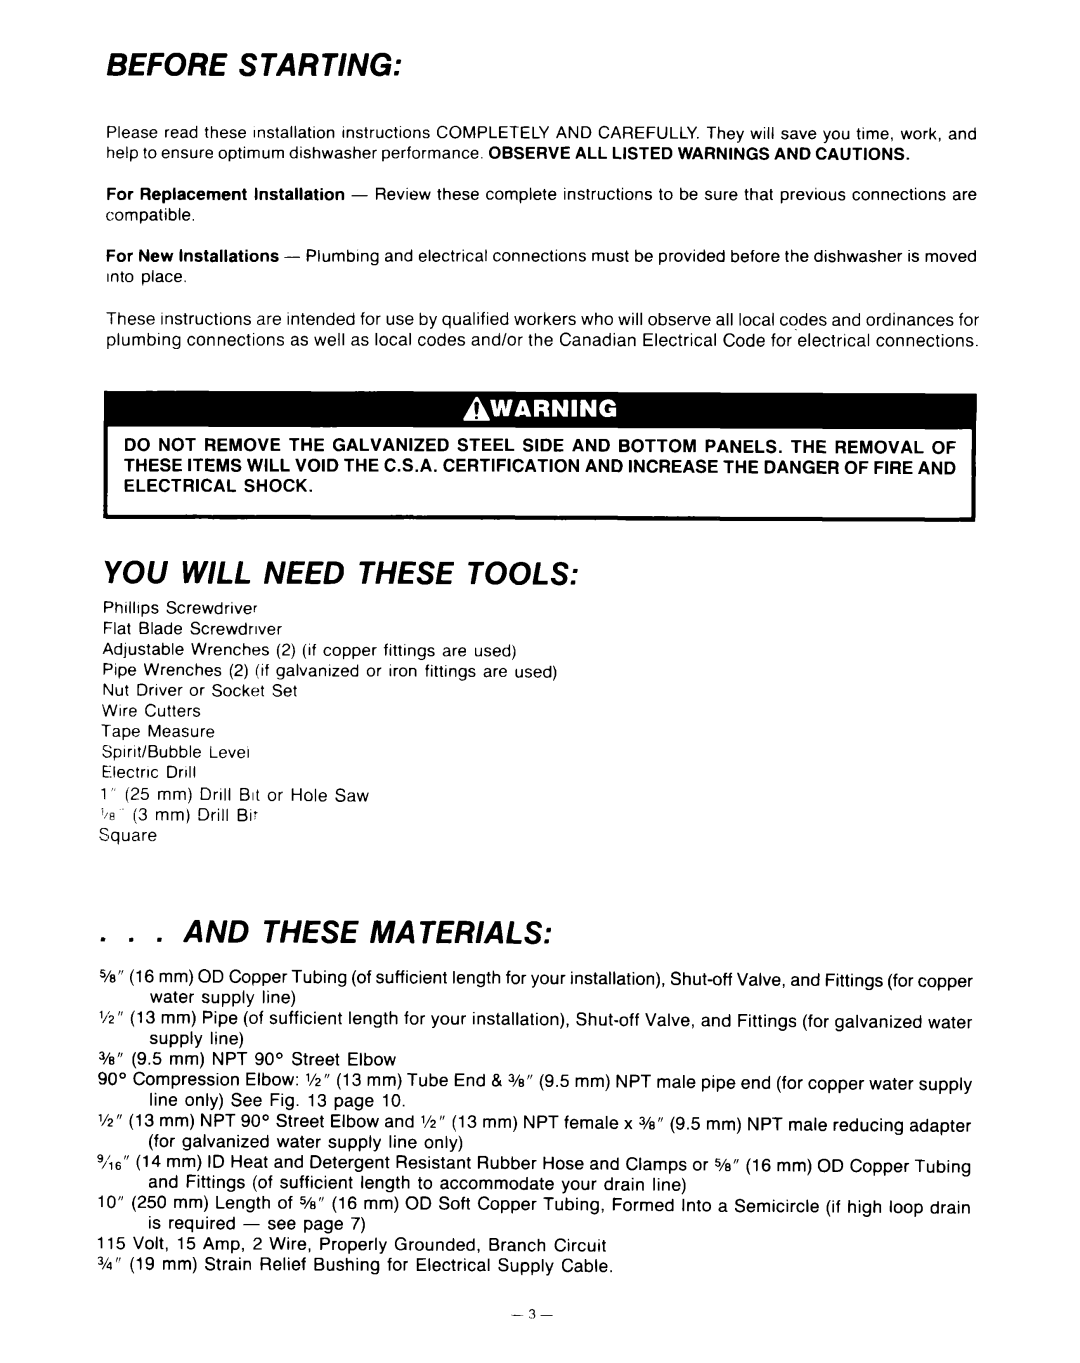 KitchenAid KUD-22 manual Before Starting, You Will Need These Tools, Aa/D These Materials 